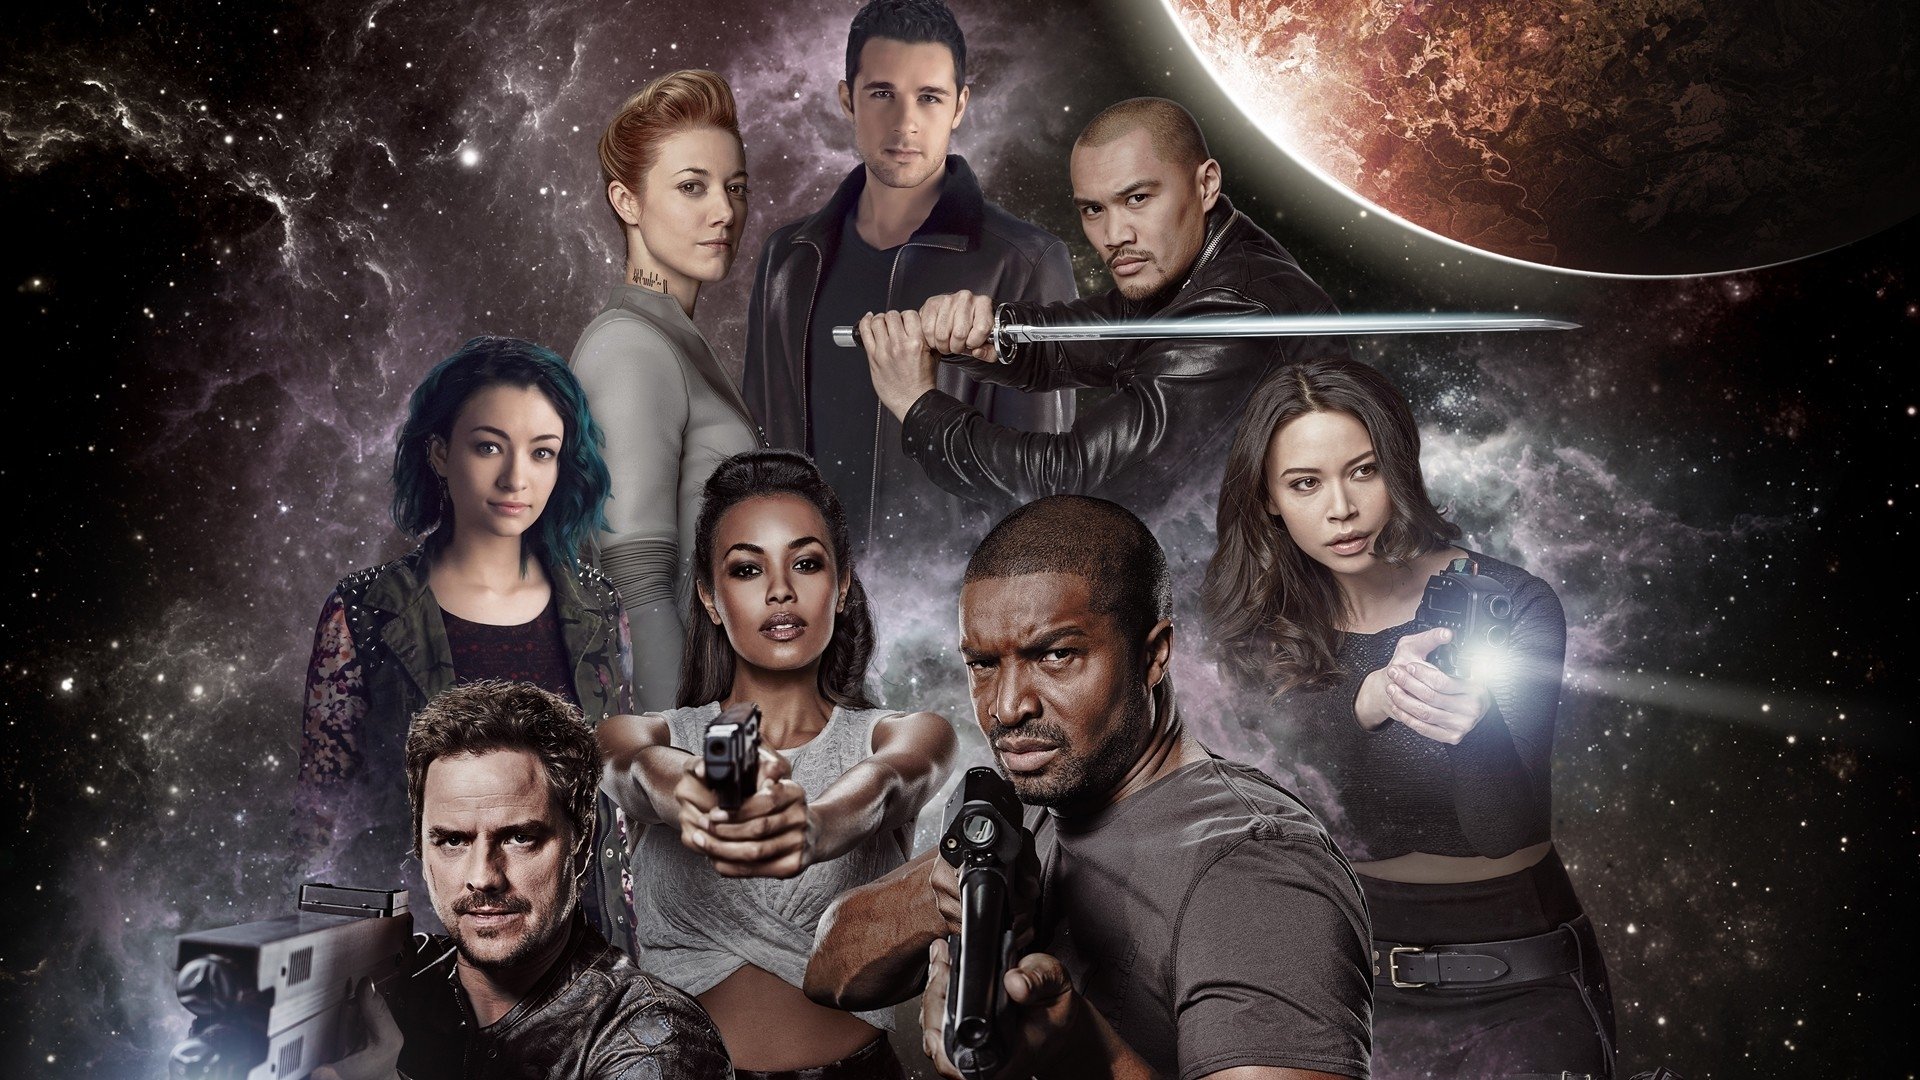 Where Does The Dark Matter Season 4 Release Date Stands?